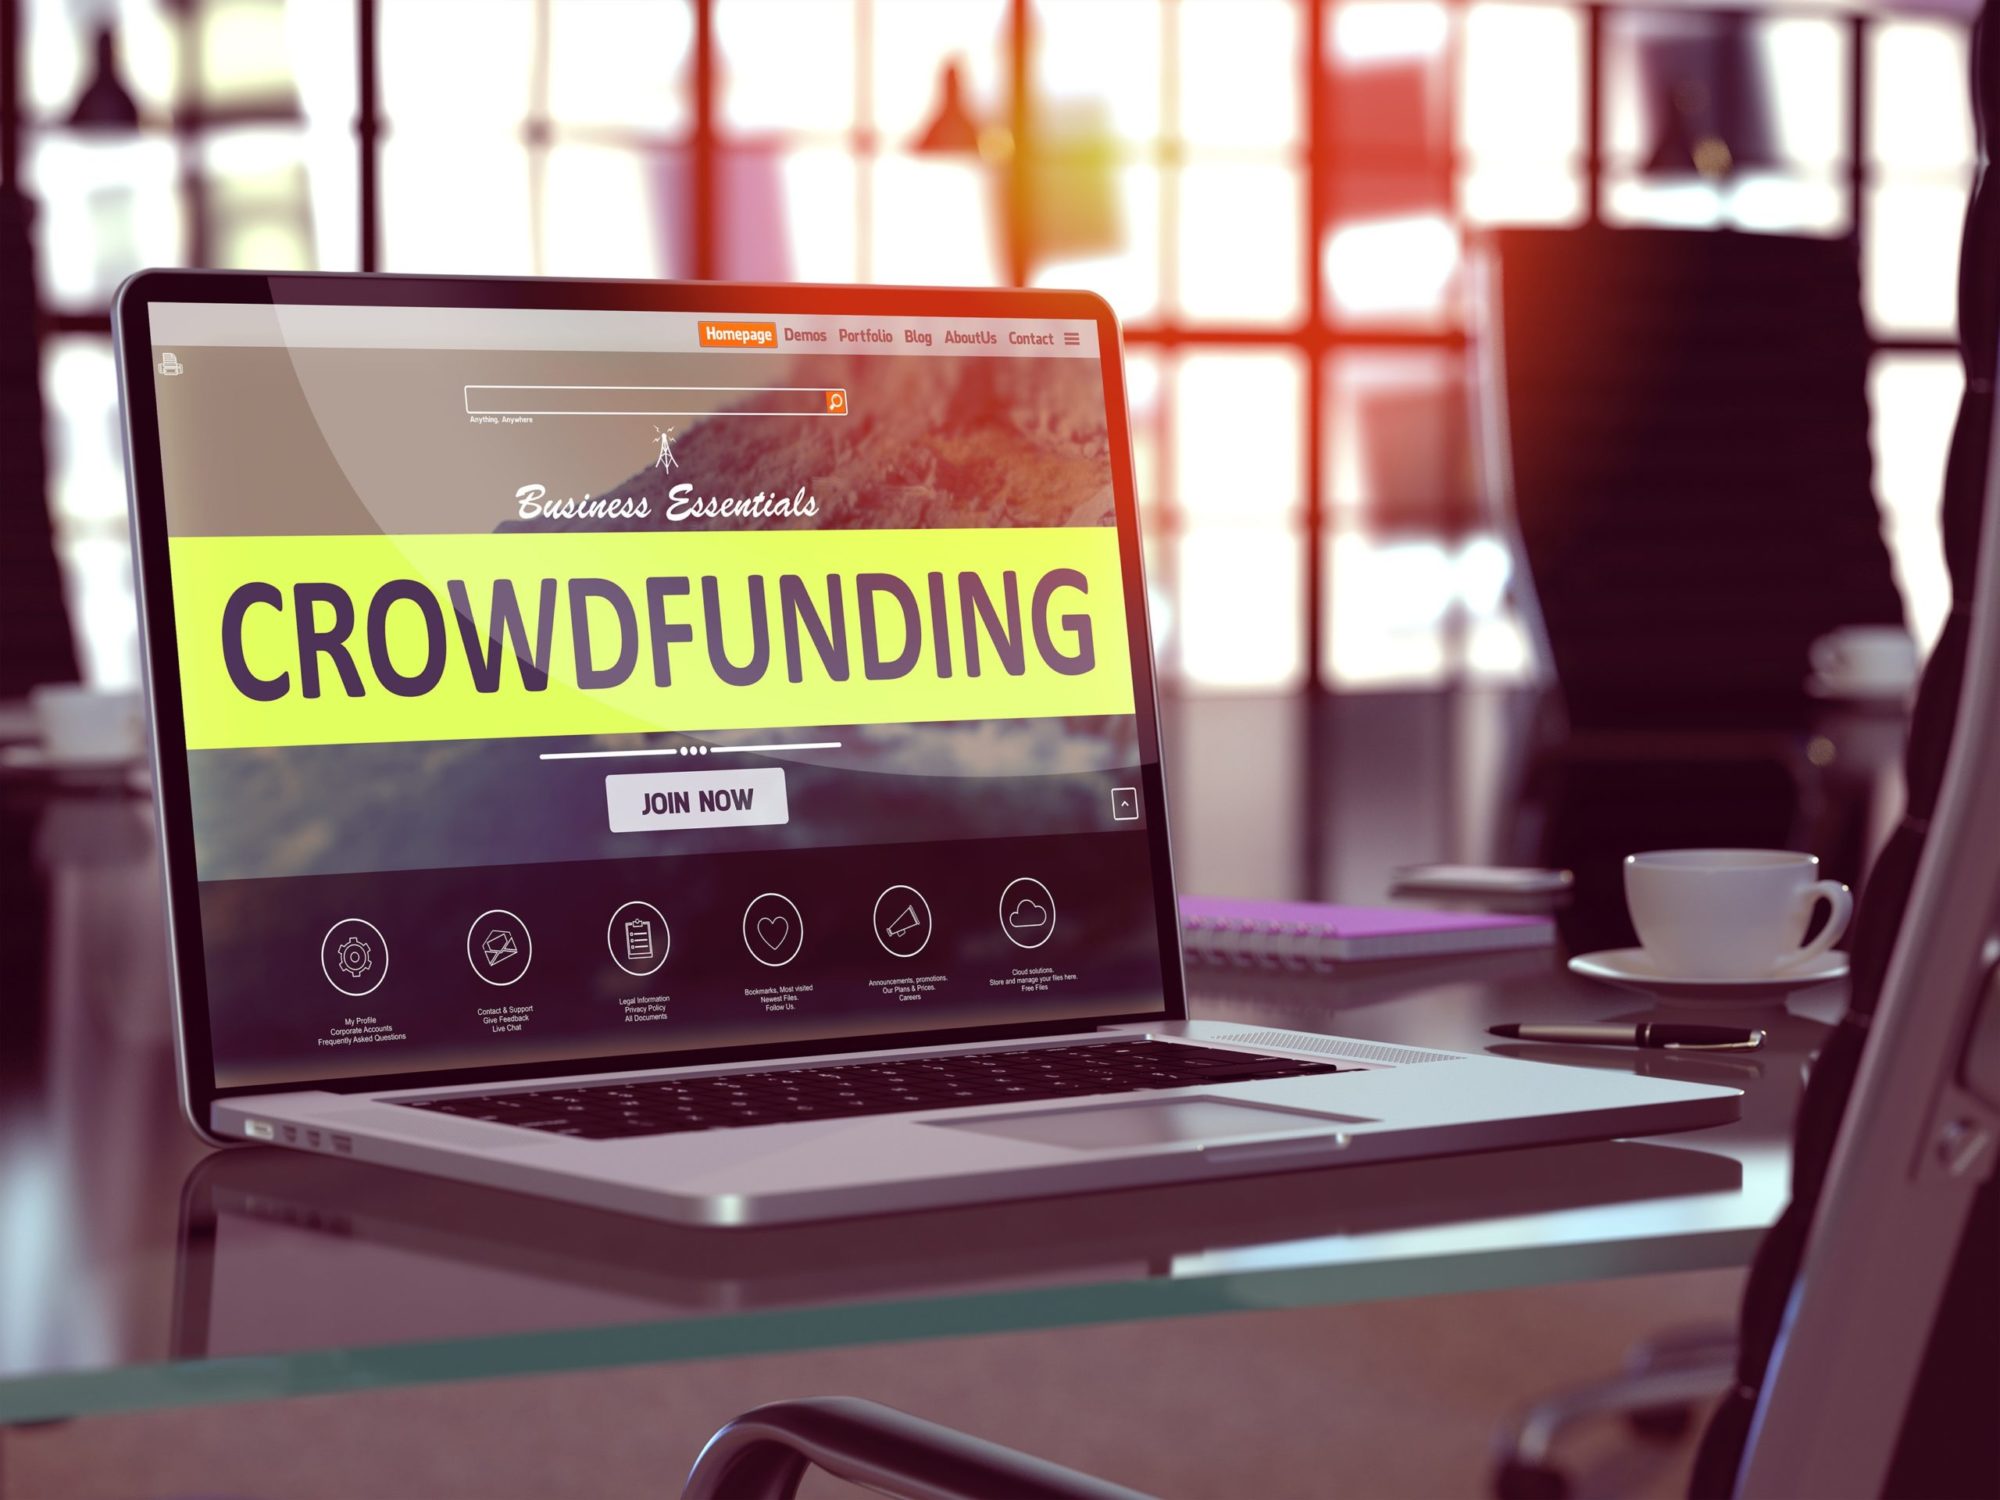 Crowdfunding is the natural way forward for real estate development in Africa, and spearheading this model of investment is Realty Africa, an investment services company operating in the sub-Saharan region.